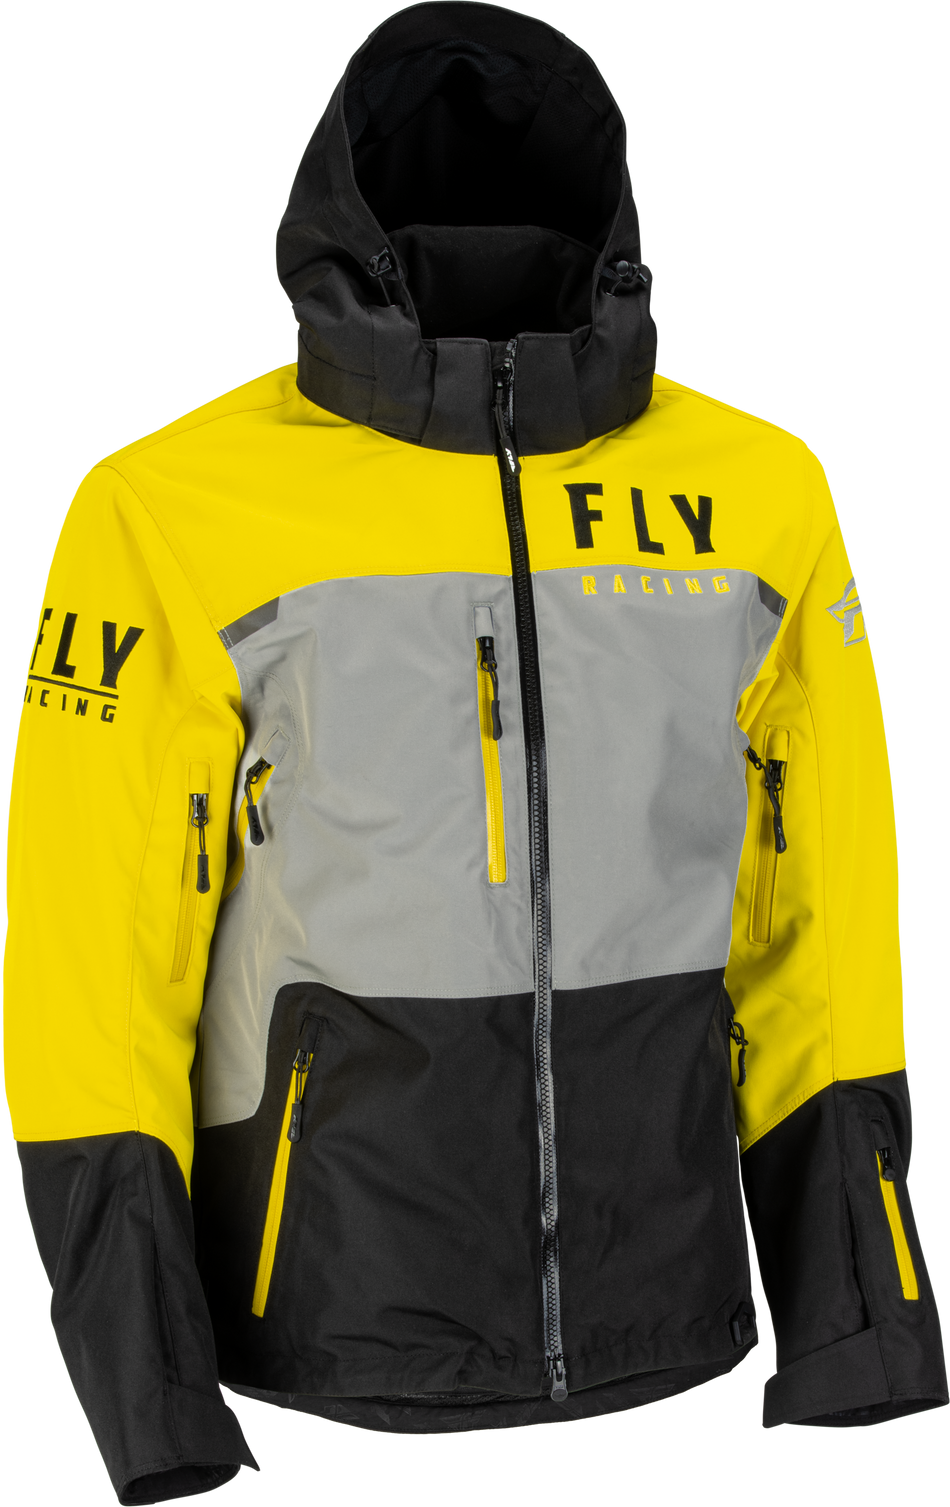 FLY RACING Carbon Jacket Yellow/Grey Md 470-4136M